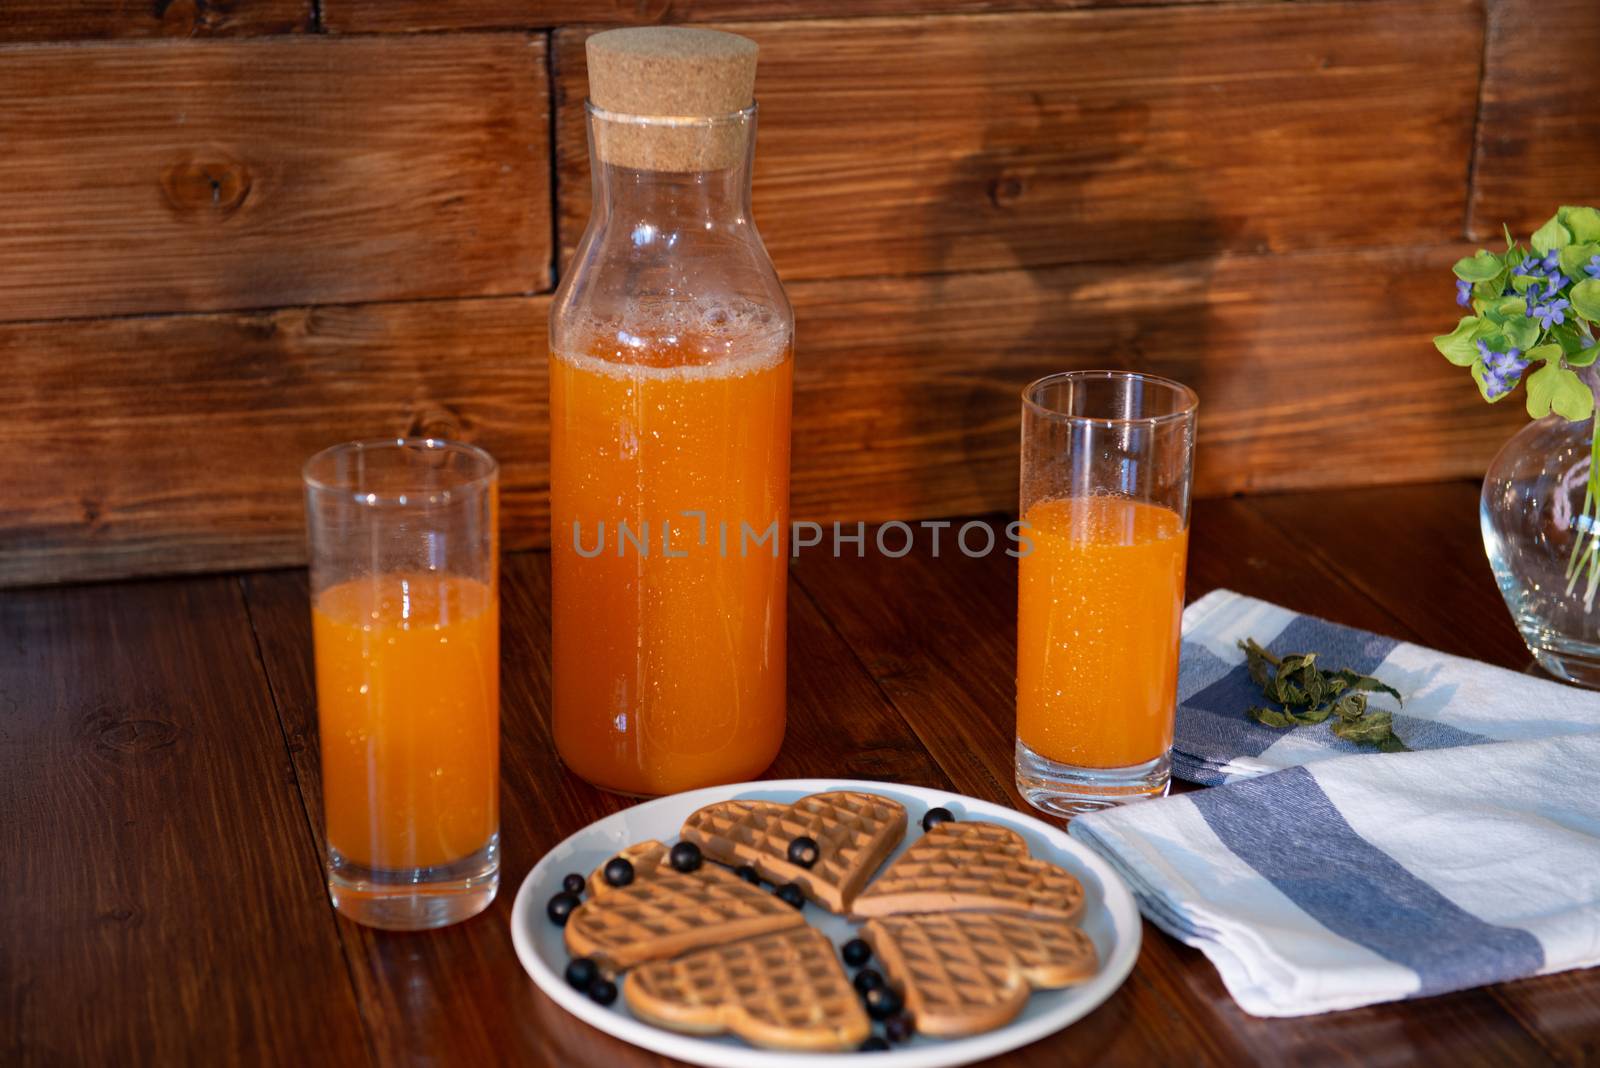 breakfast for two. freshly squeezed juice and wafers by marynkin